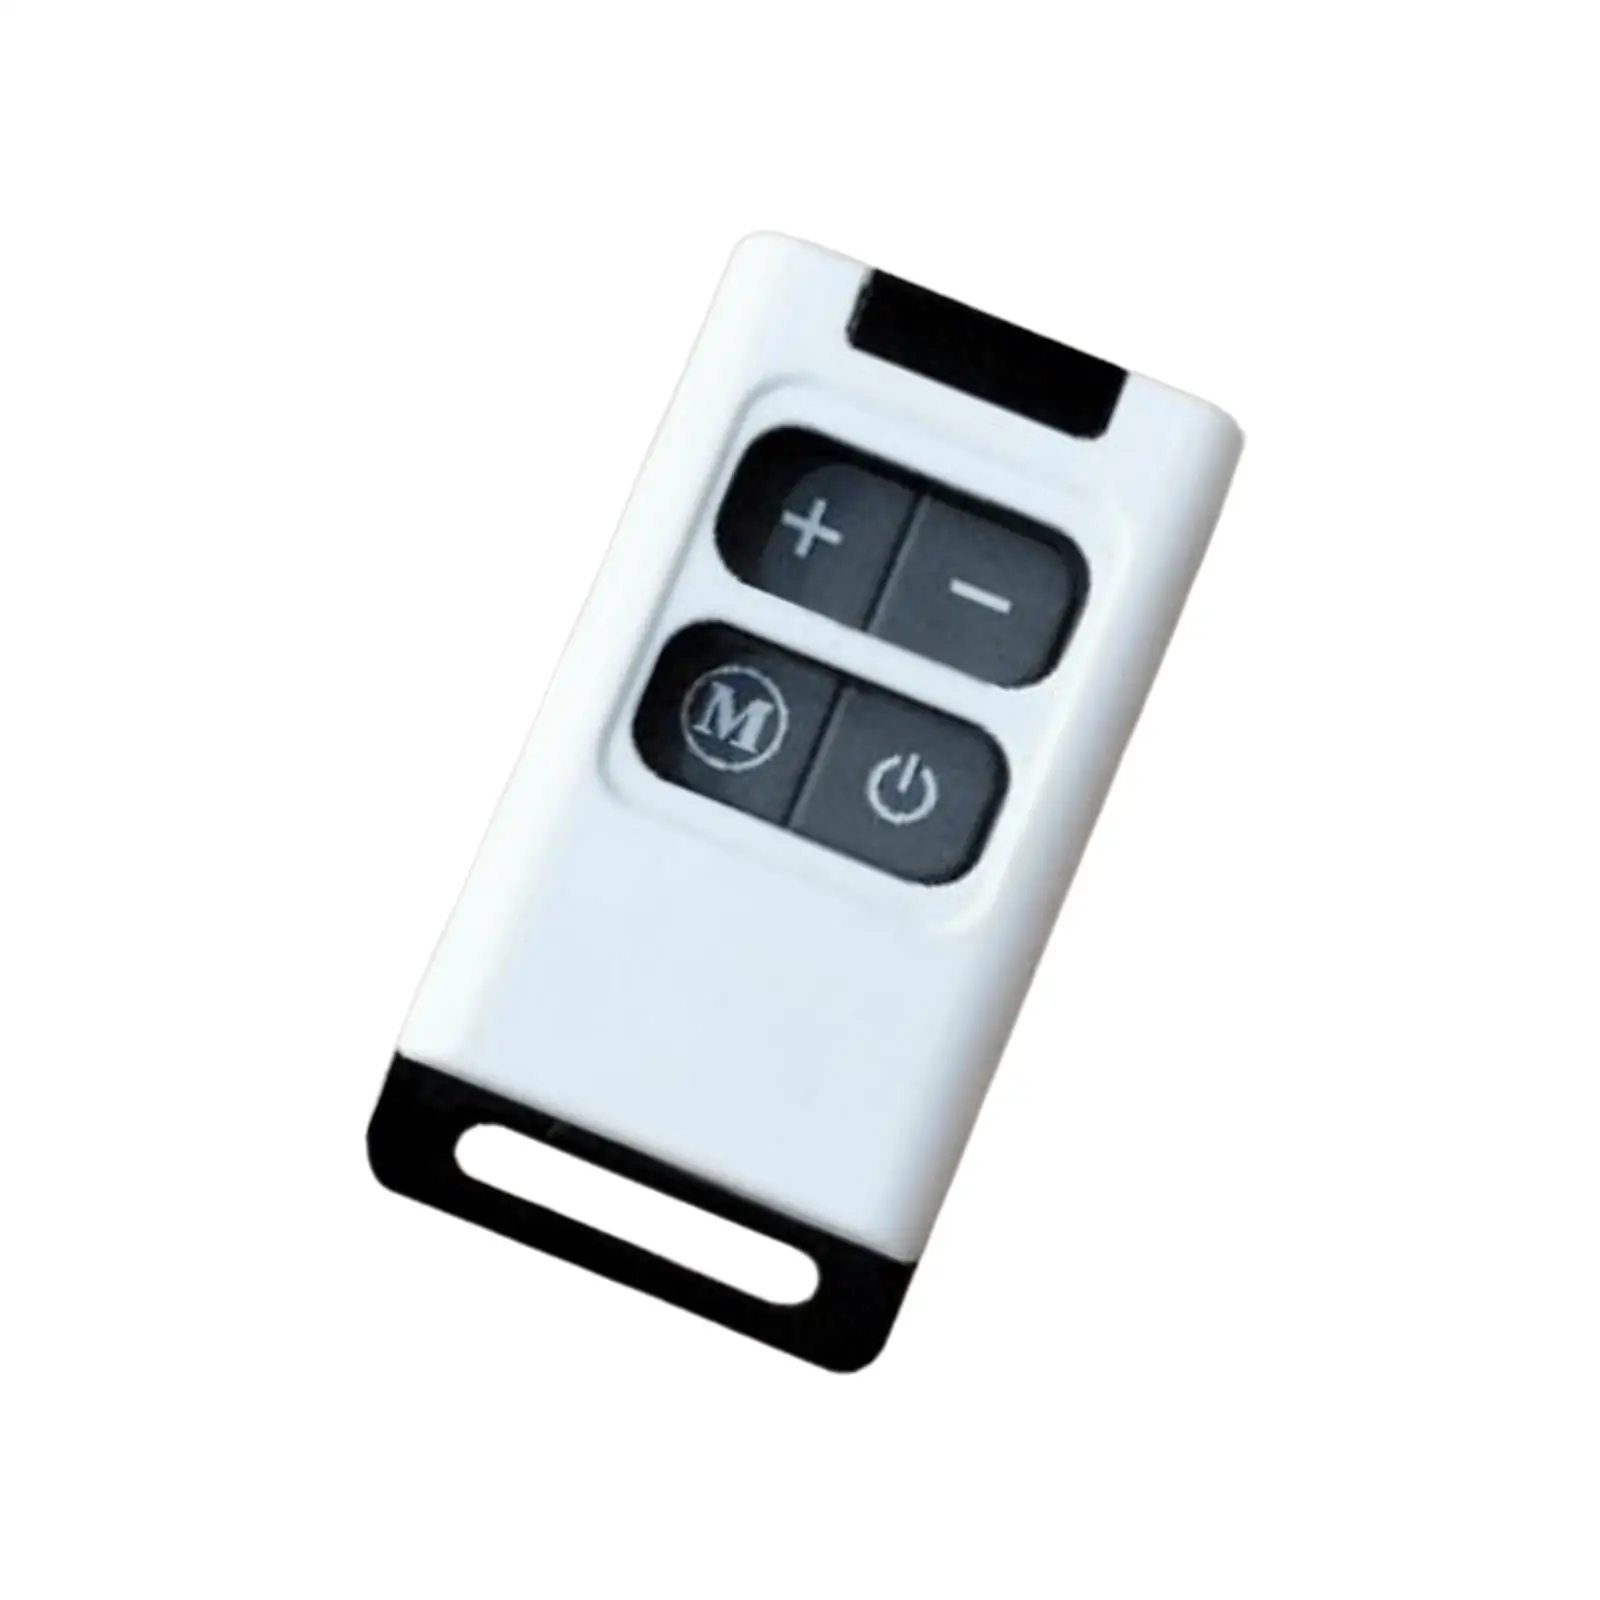 Car Parking Heater Remote Control Switch Controller for Trucks Automotive Heating Accessories RV Air Parking Heater Vehicle